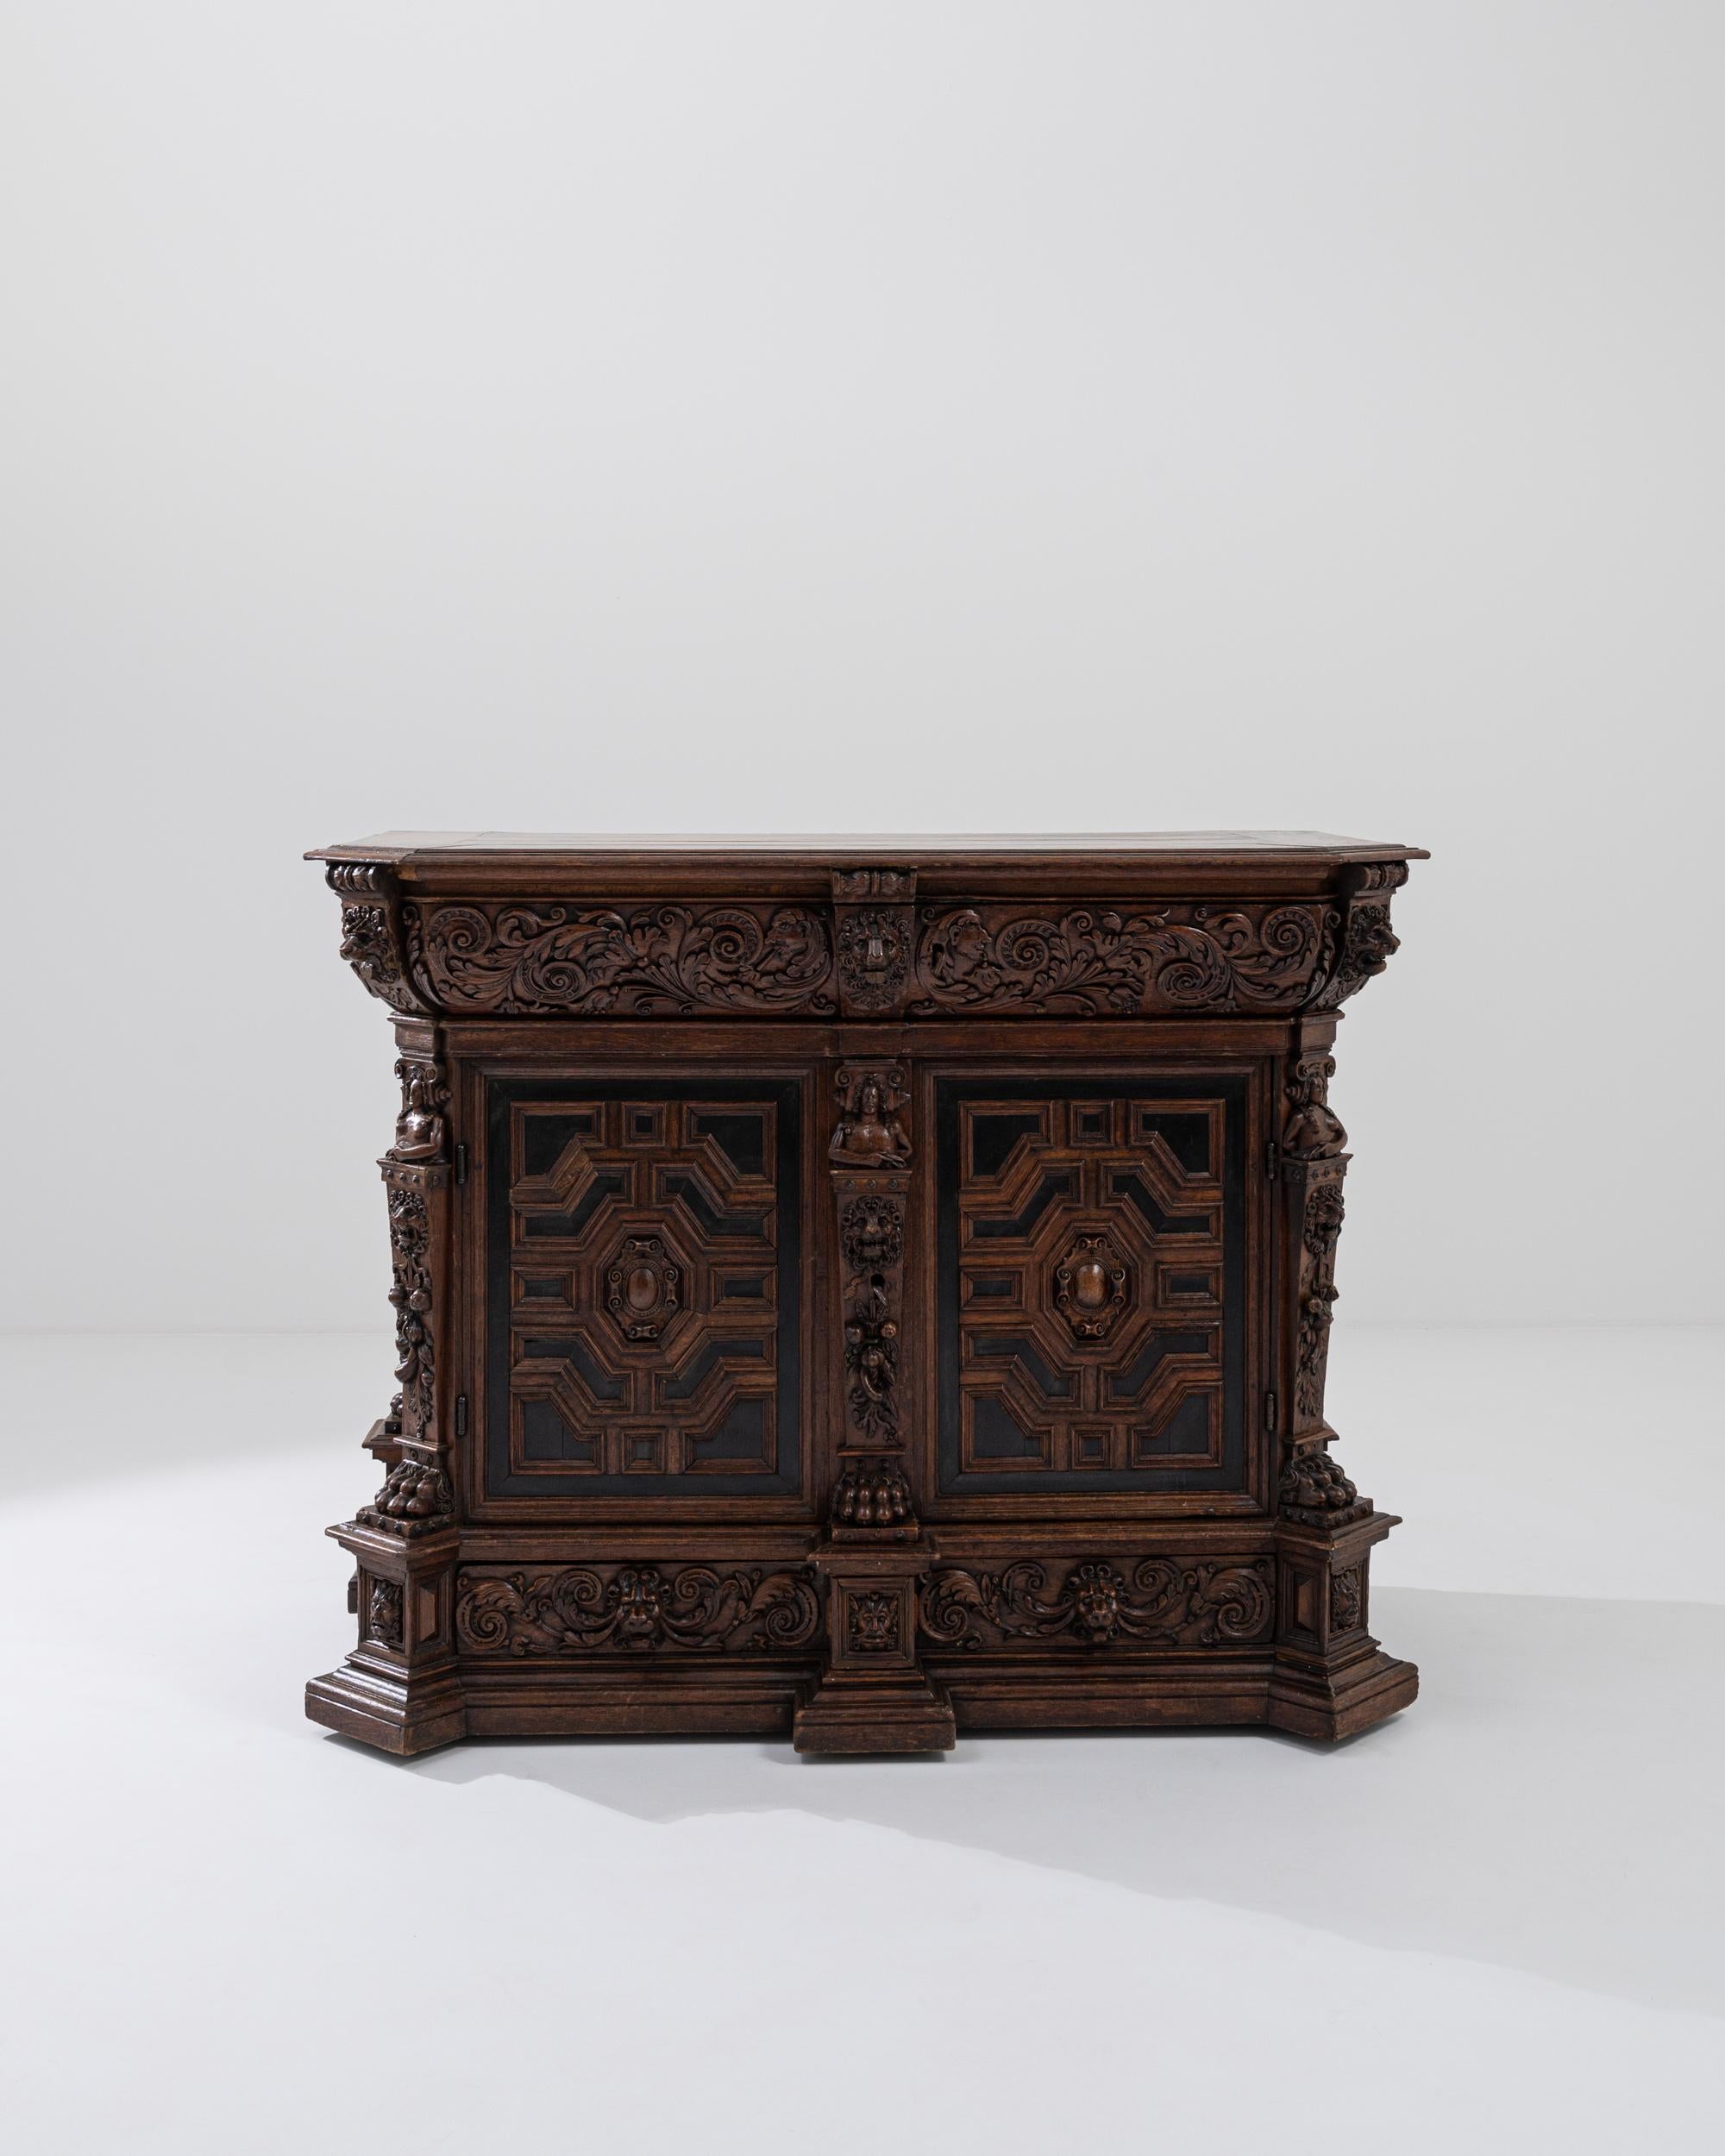 A wooden buffet from 19th century Belgium. Intricate floral patterning, figurative motifs, lion heads, and geometric mazes all are hand-carved into the front of this dazzling buffet. A feat of technical craftsmanship and vision, this remarkable